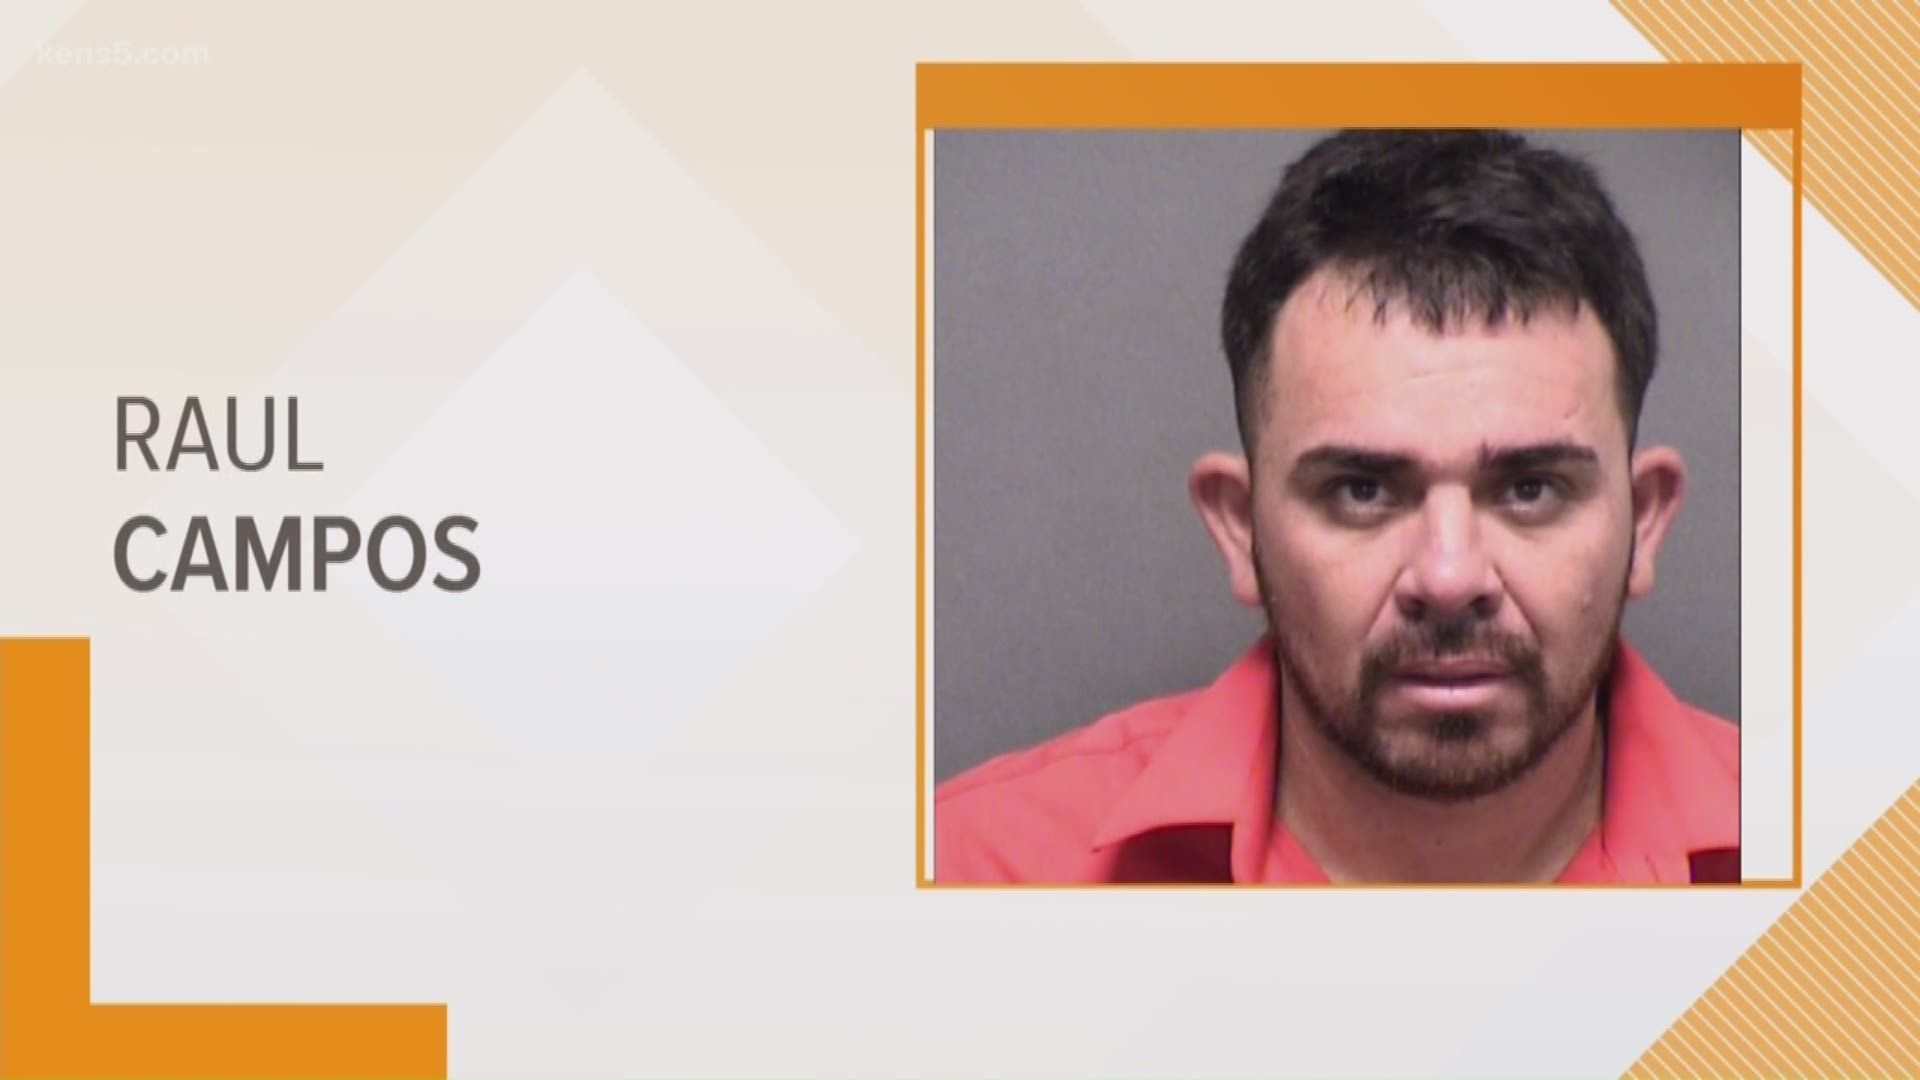 BCSO is looking for Raul Campos who is accused of sexually assaulting a woman at gunpoint in Elmendorf.